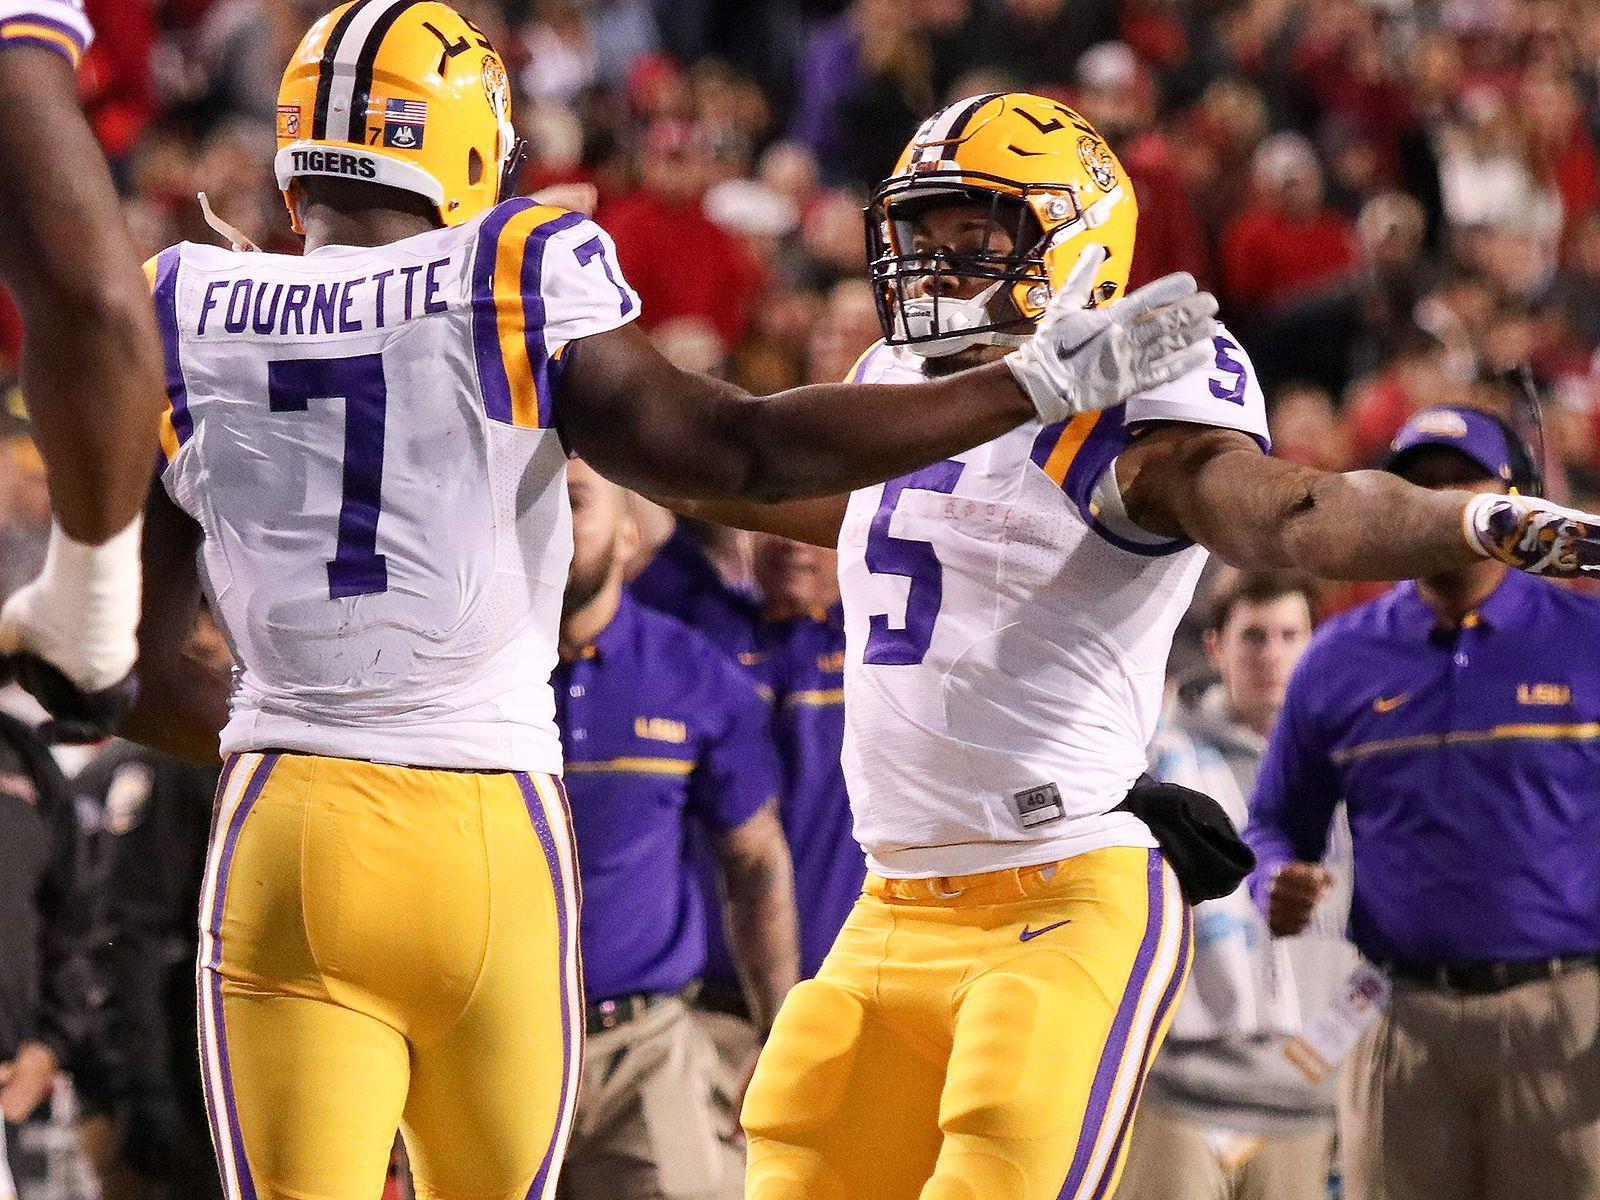 LSU football: Derrius Guice spearheads Tigers' offense